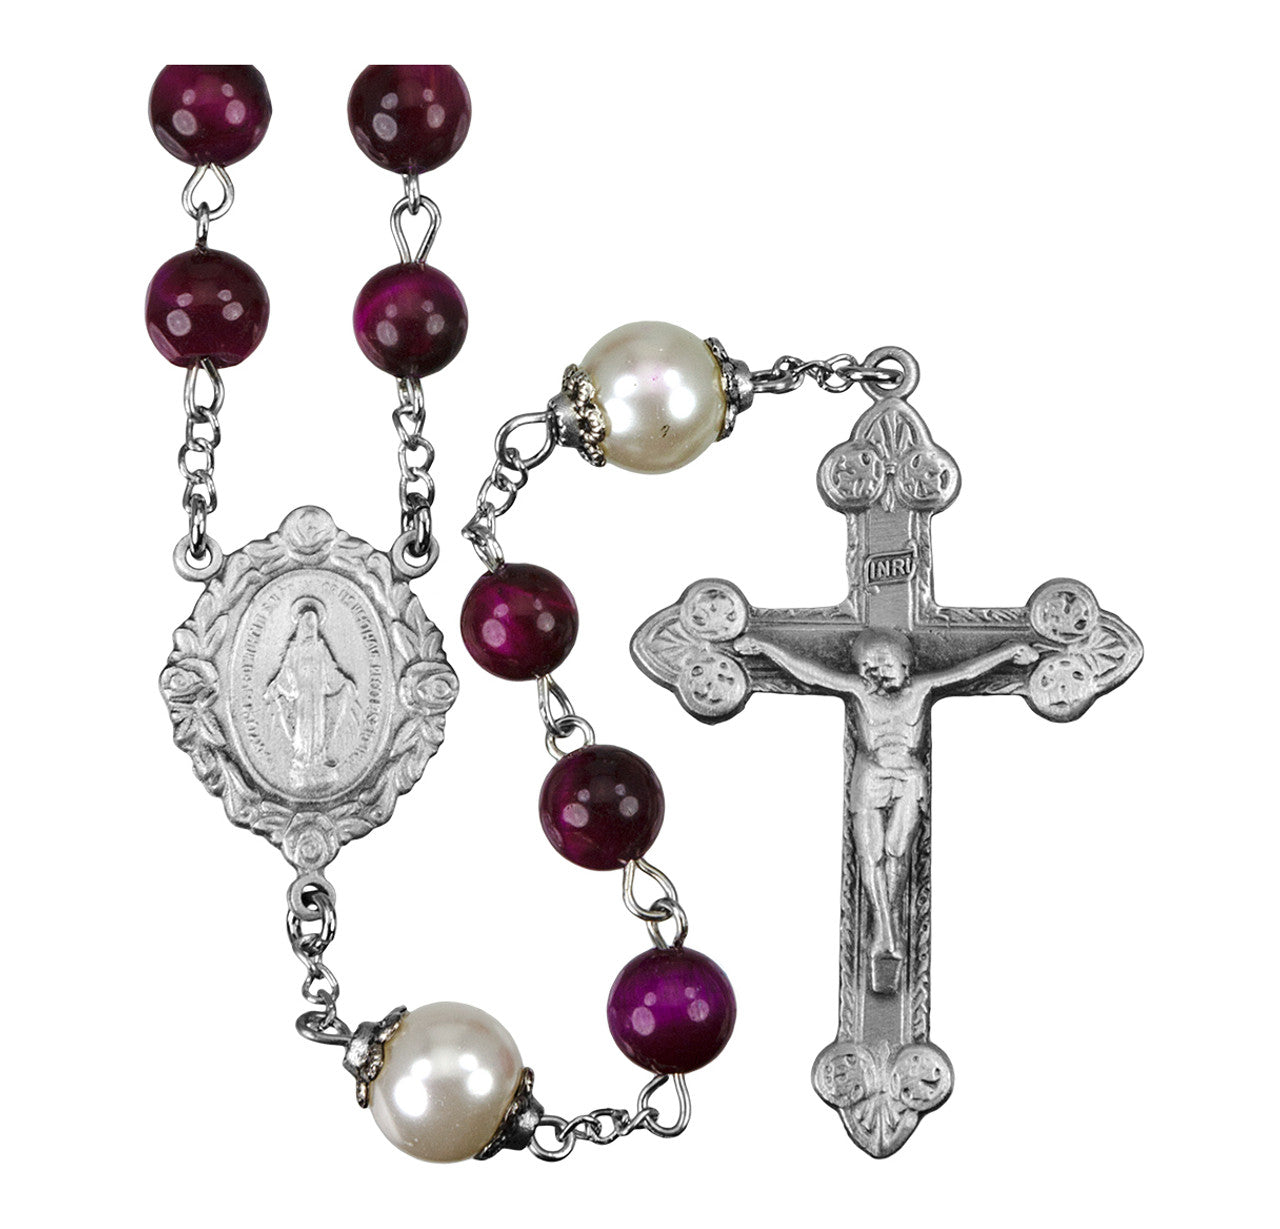 Fuchsia Dyed Tiger Eye Gemstone Bead Rosary made with Genuine Pewter Crucifix and Centerpiece